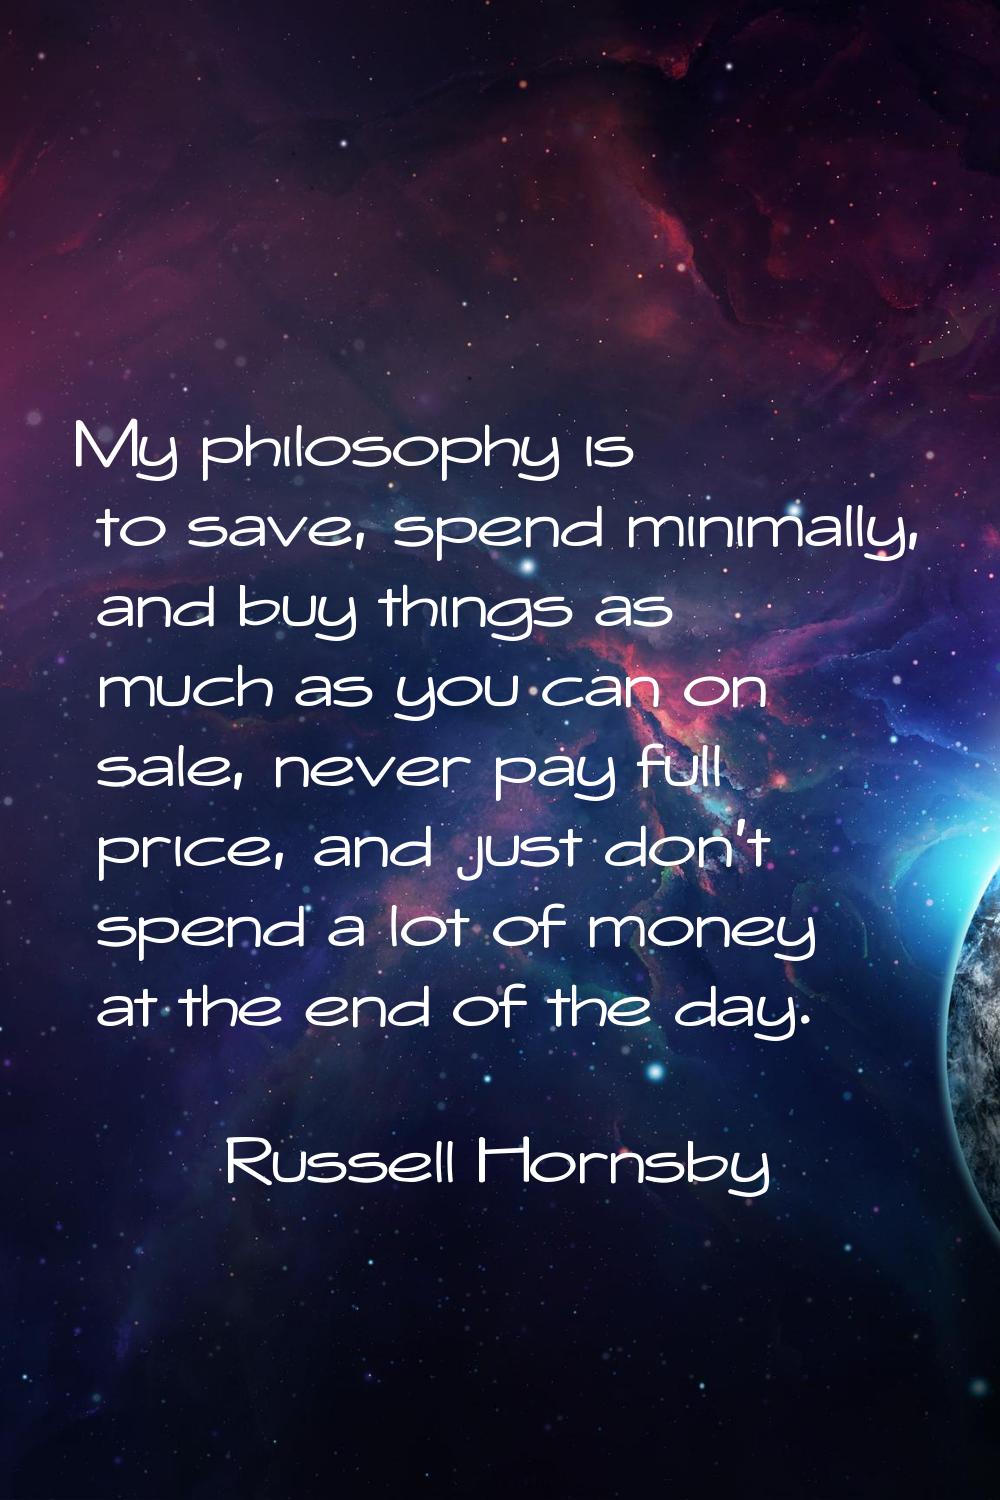 My philosophy is to save, spend minimally, and buy things as much as you can on sale, never pay ful